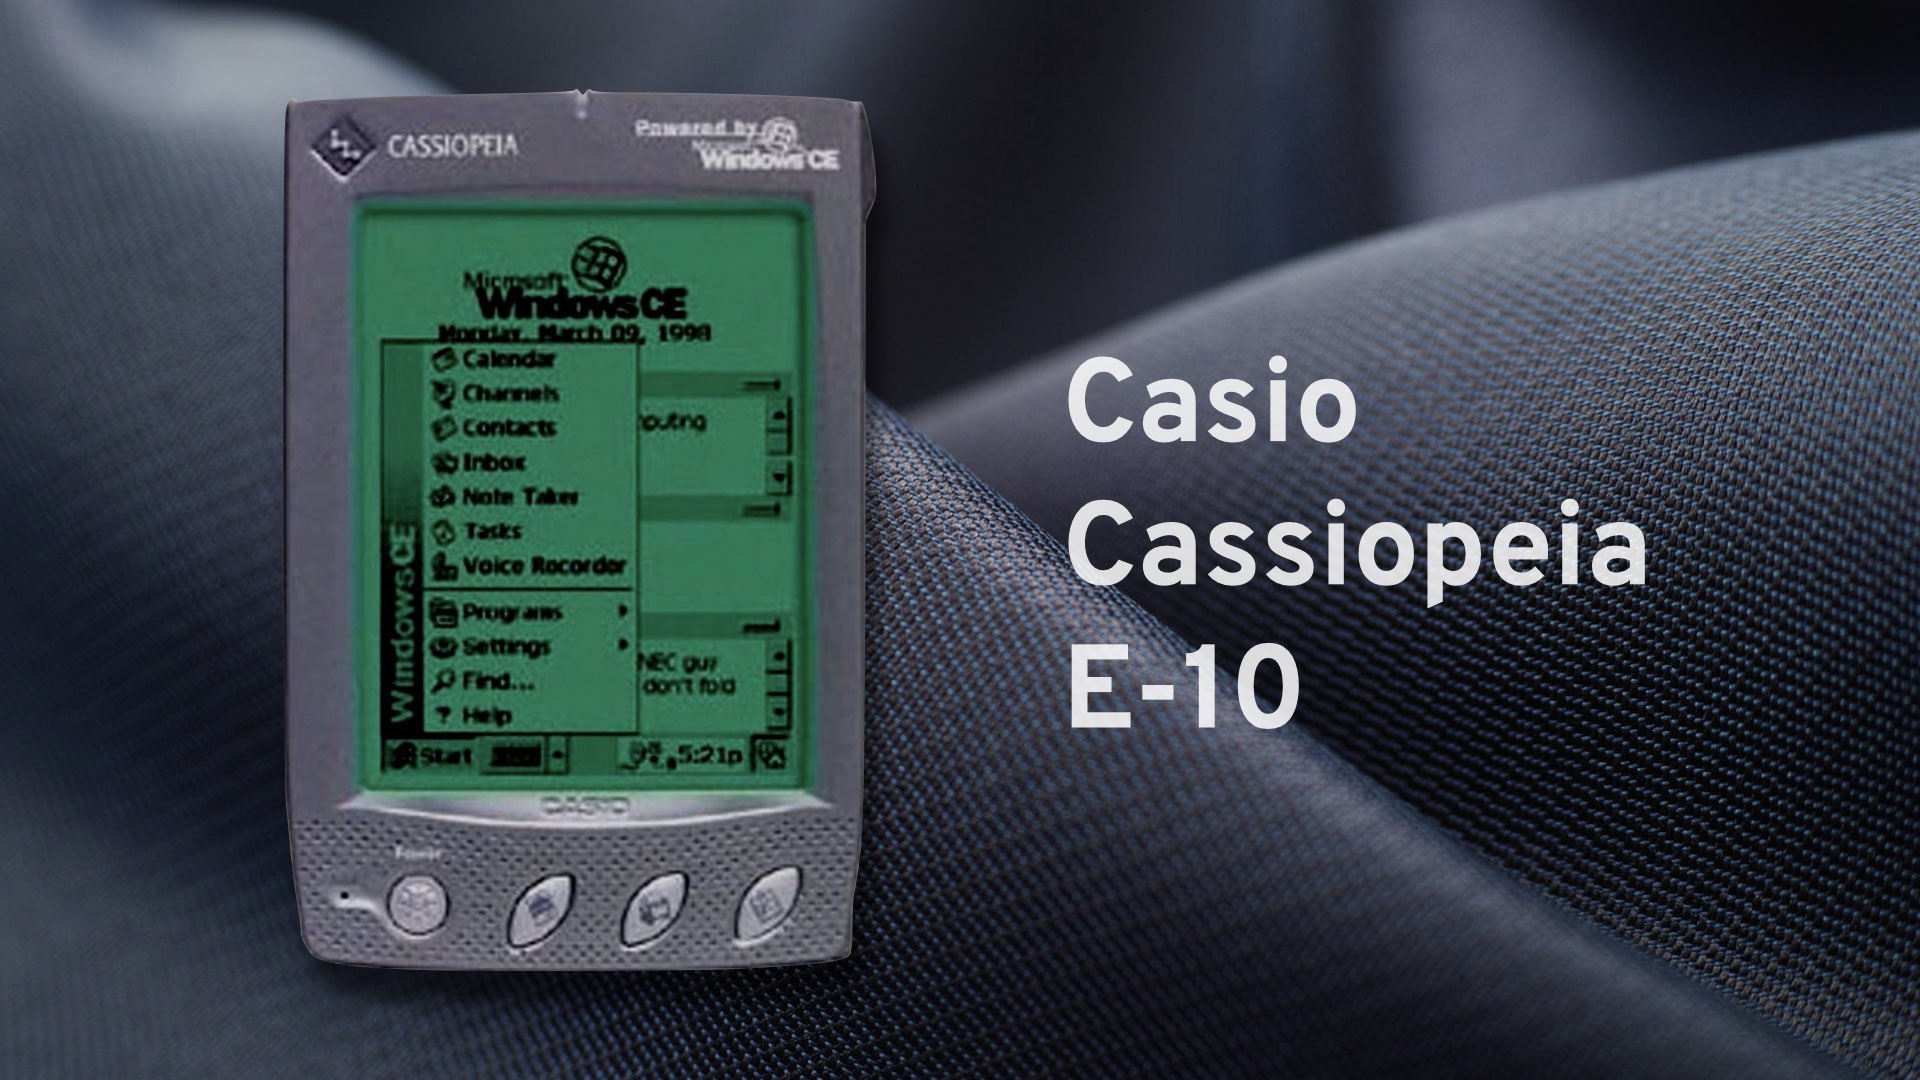 A Casio Cassiopeia E-10 sitting on a table, showing a Start menu